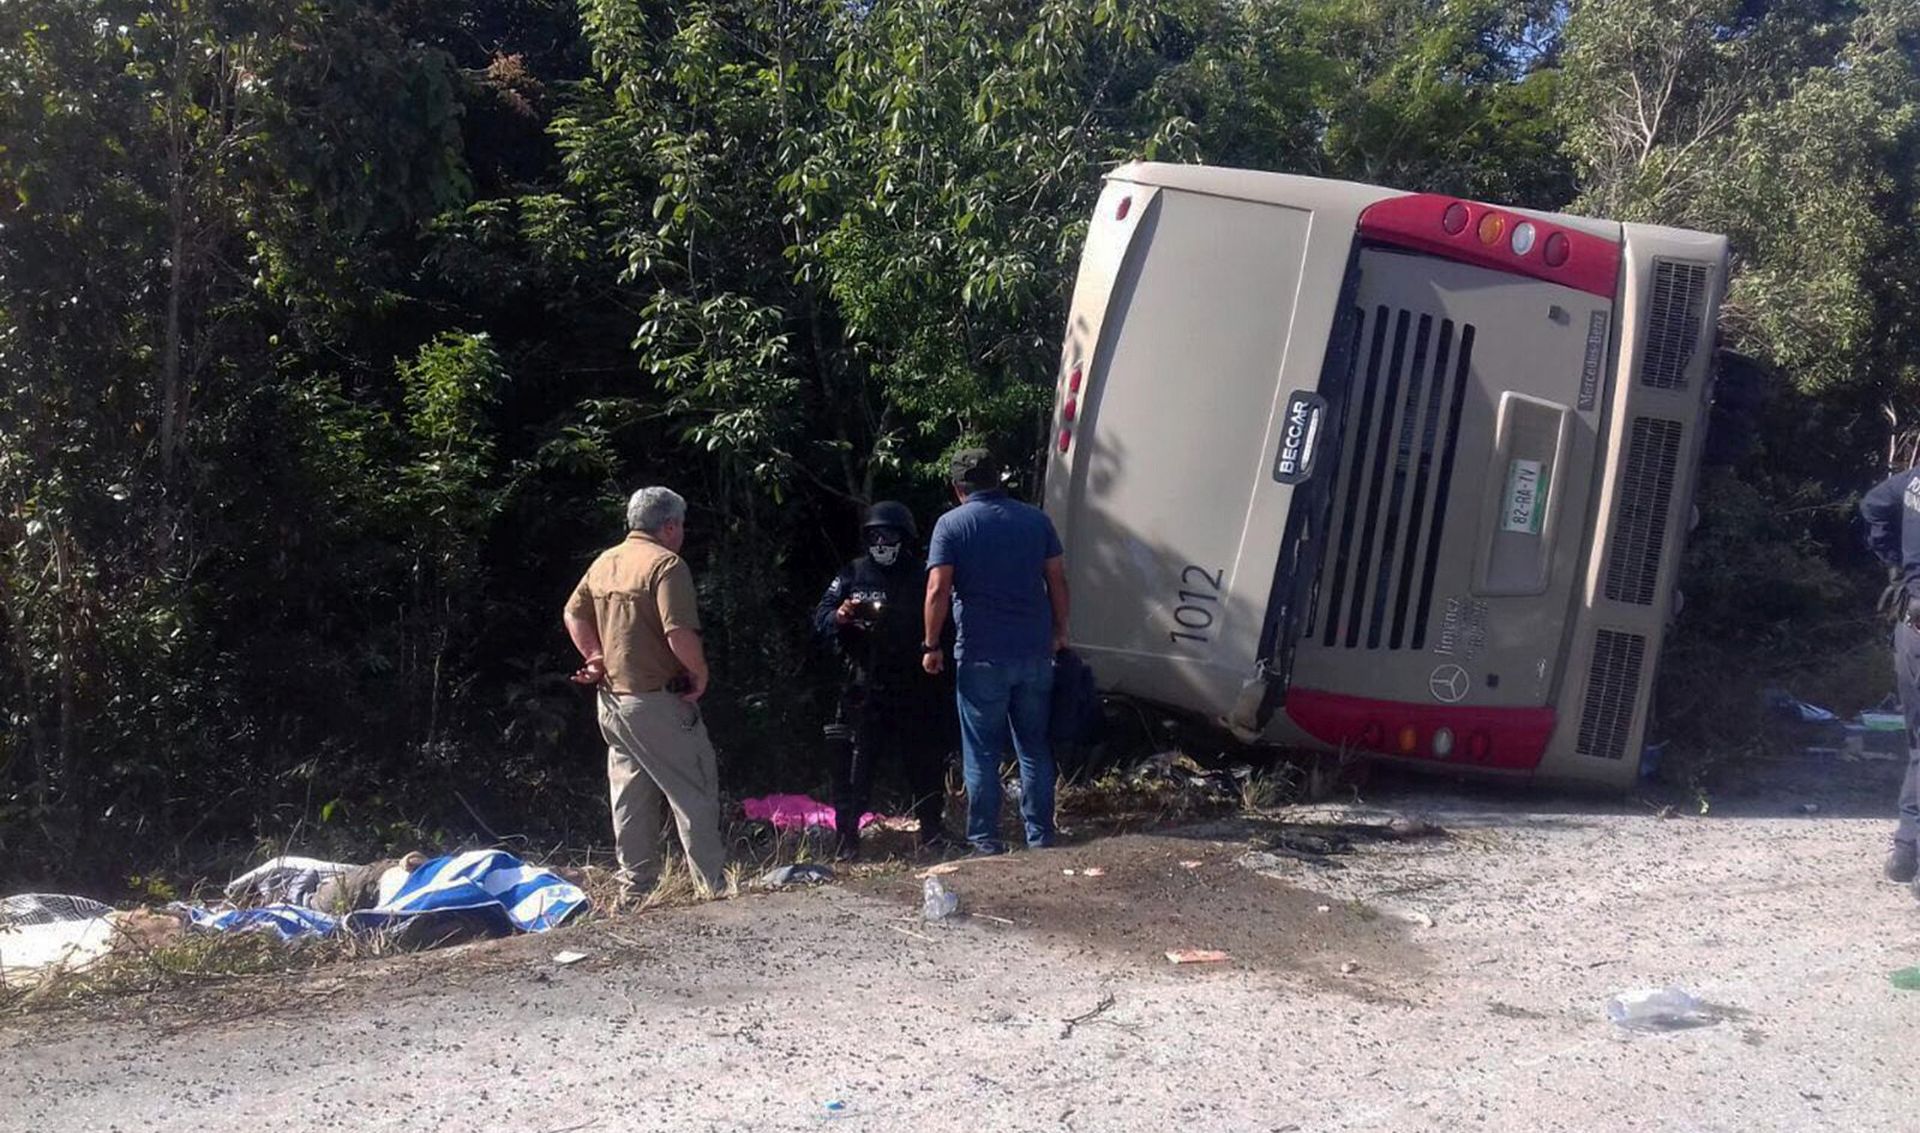 epa06399358 General view of a crashed bus at the Chetumal-Mahahual highway, in Mahahual, Mexico, 19 December 2017. Eleven people have died and 15 have been reported injured after the accident of the bus carrying 31 passengers who arrived in the area from a cruise ship, authorities informed.  EPA/STR